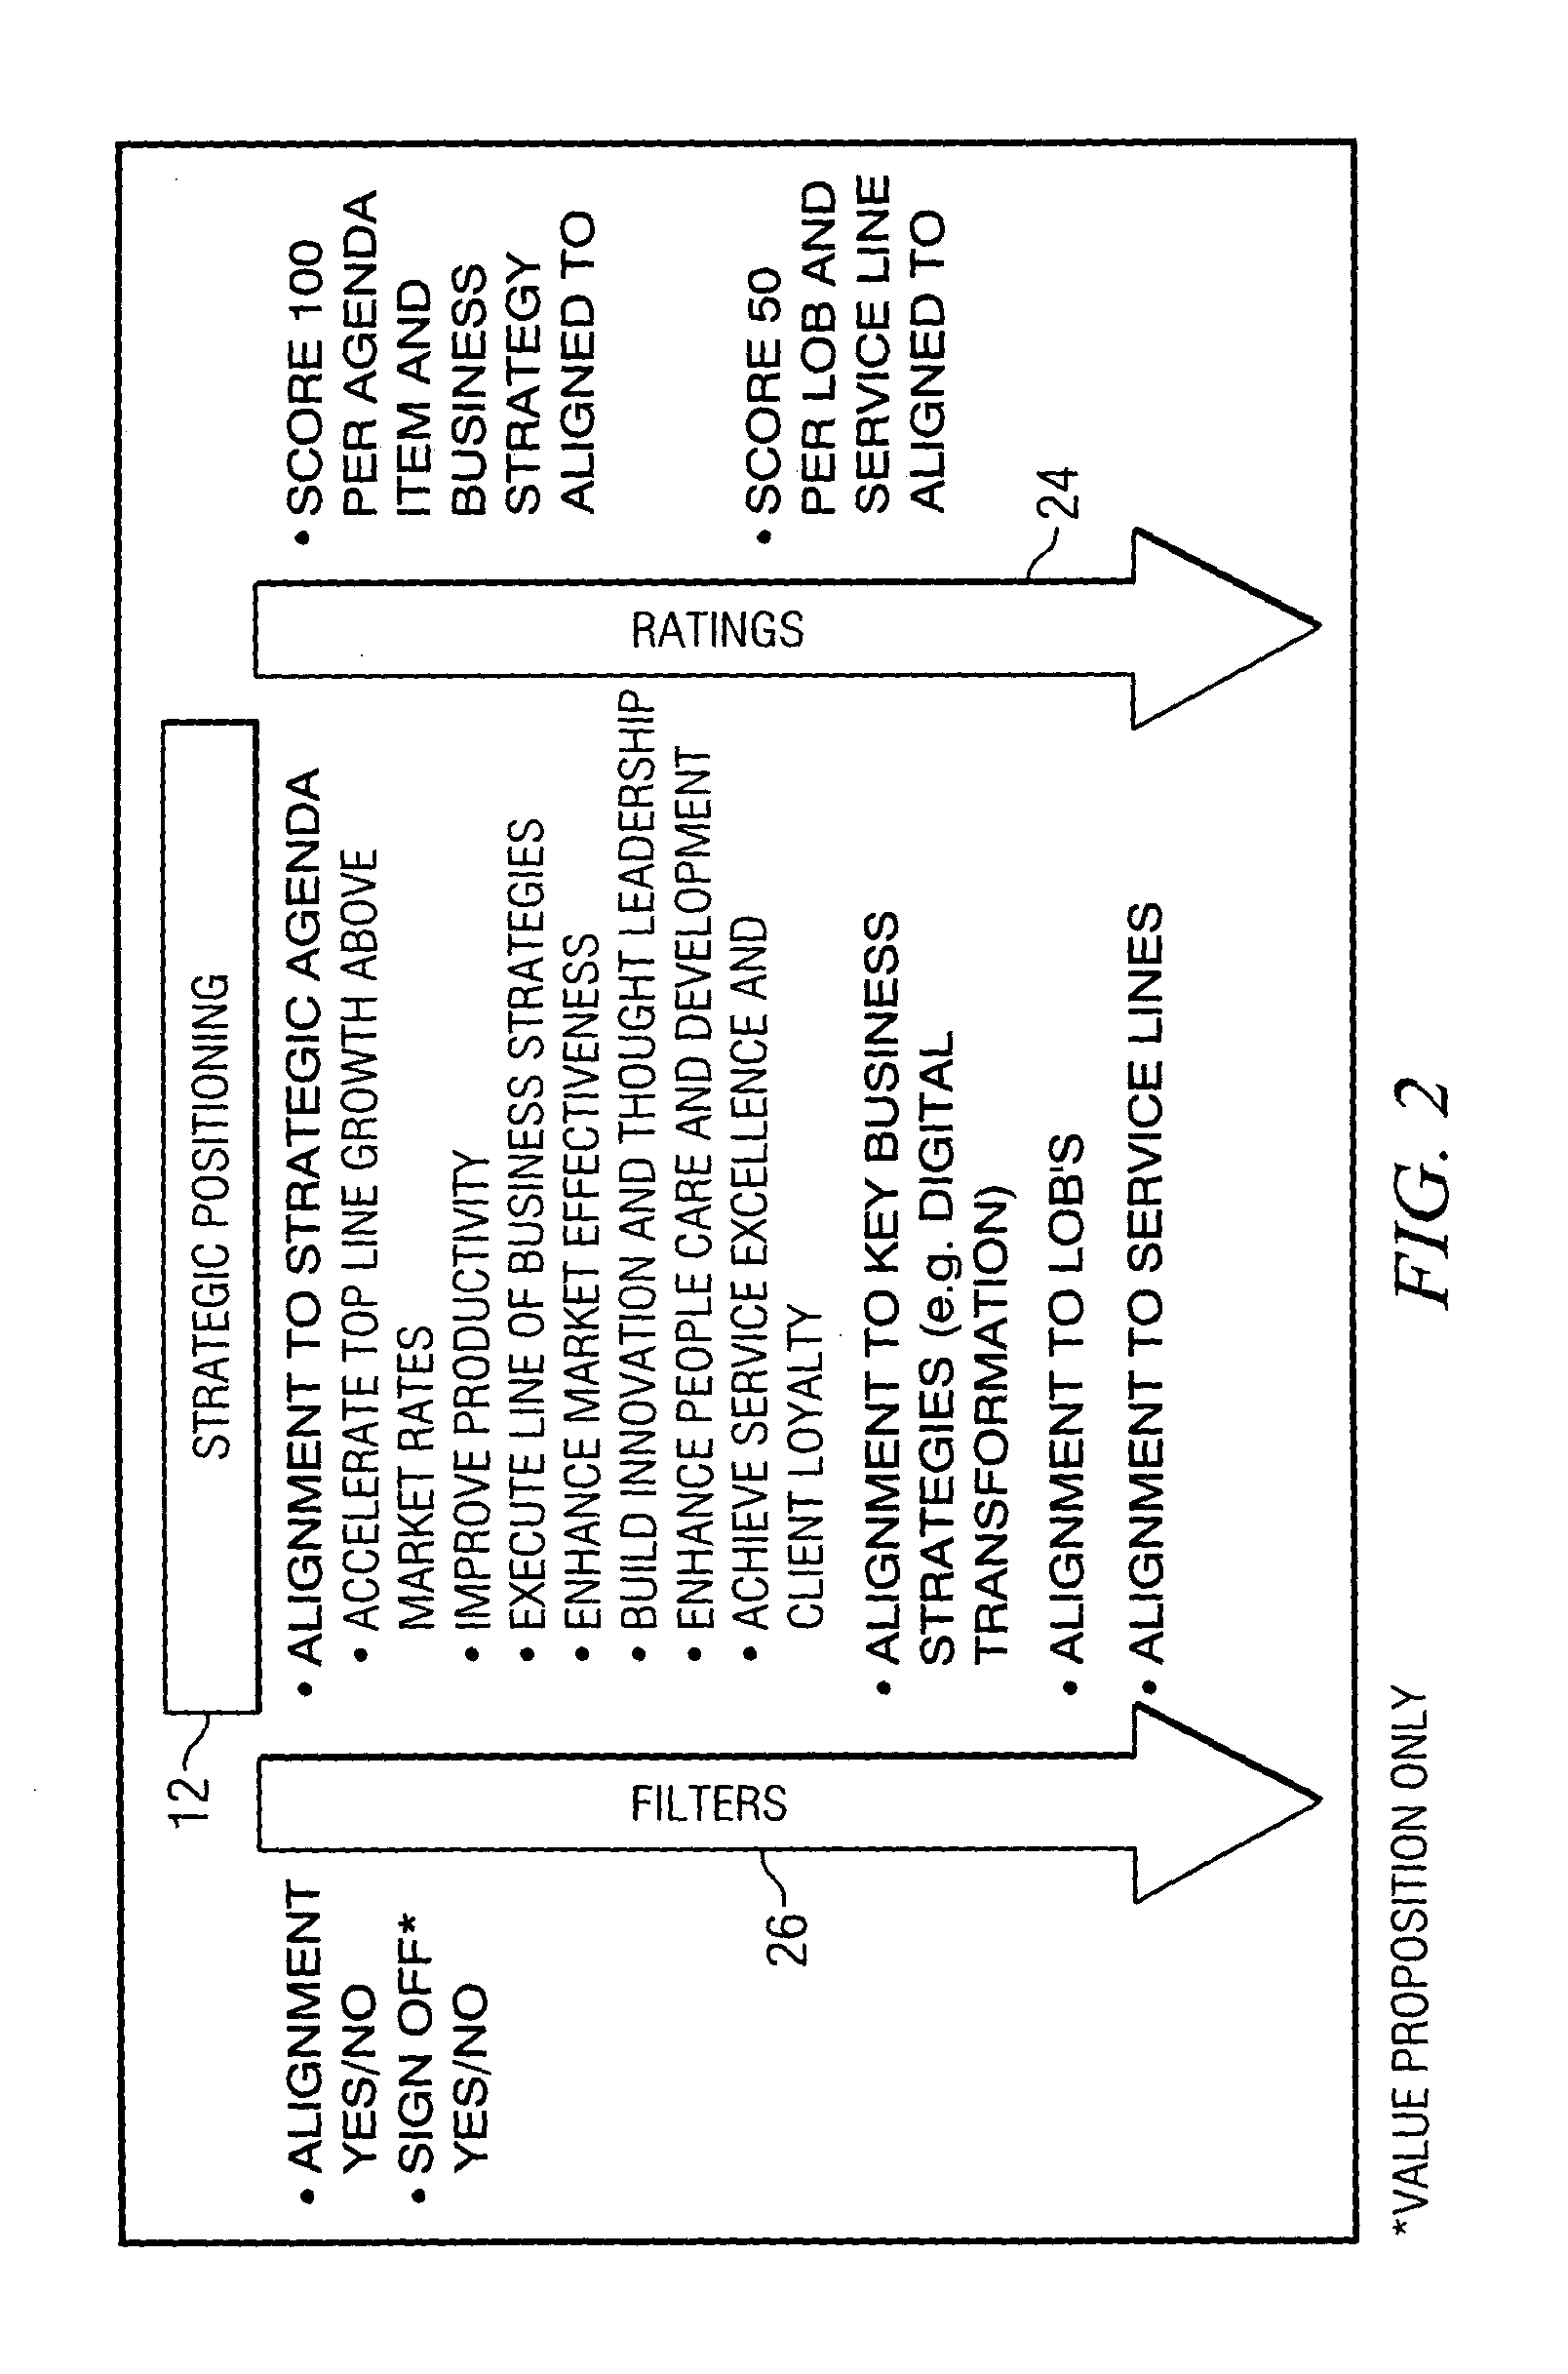 Method for assessing information technology needs in a business